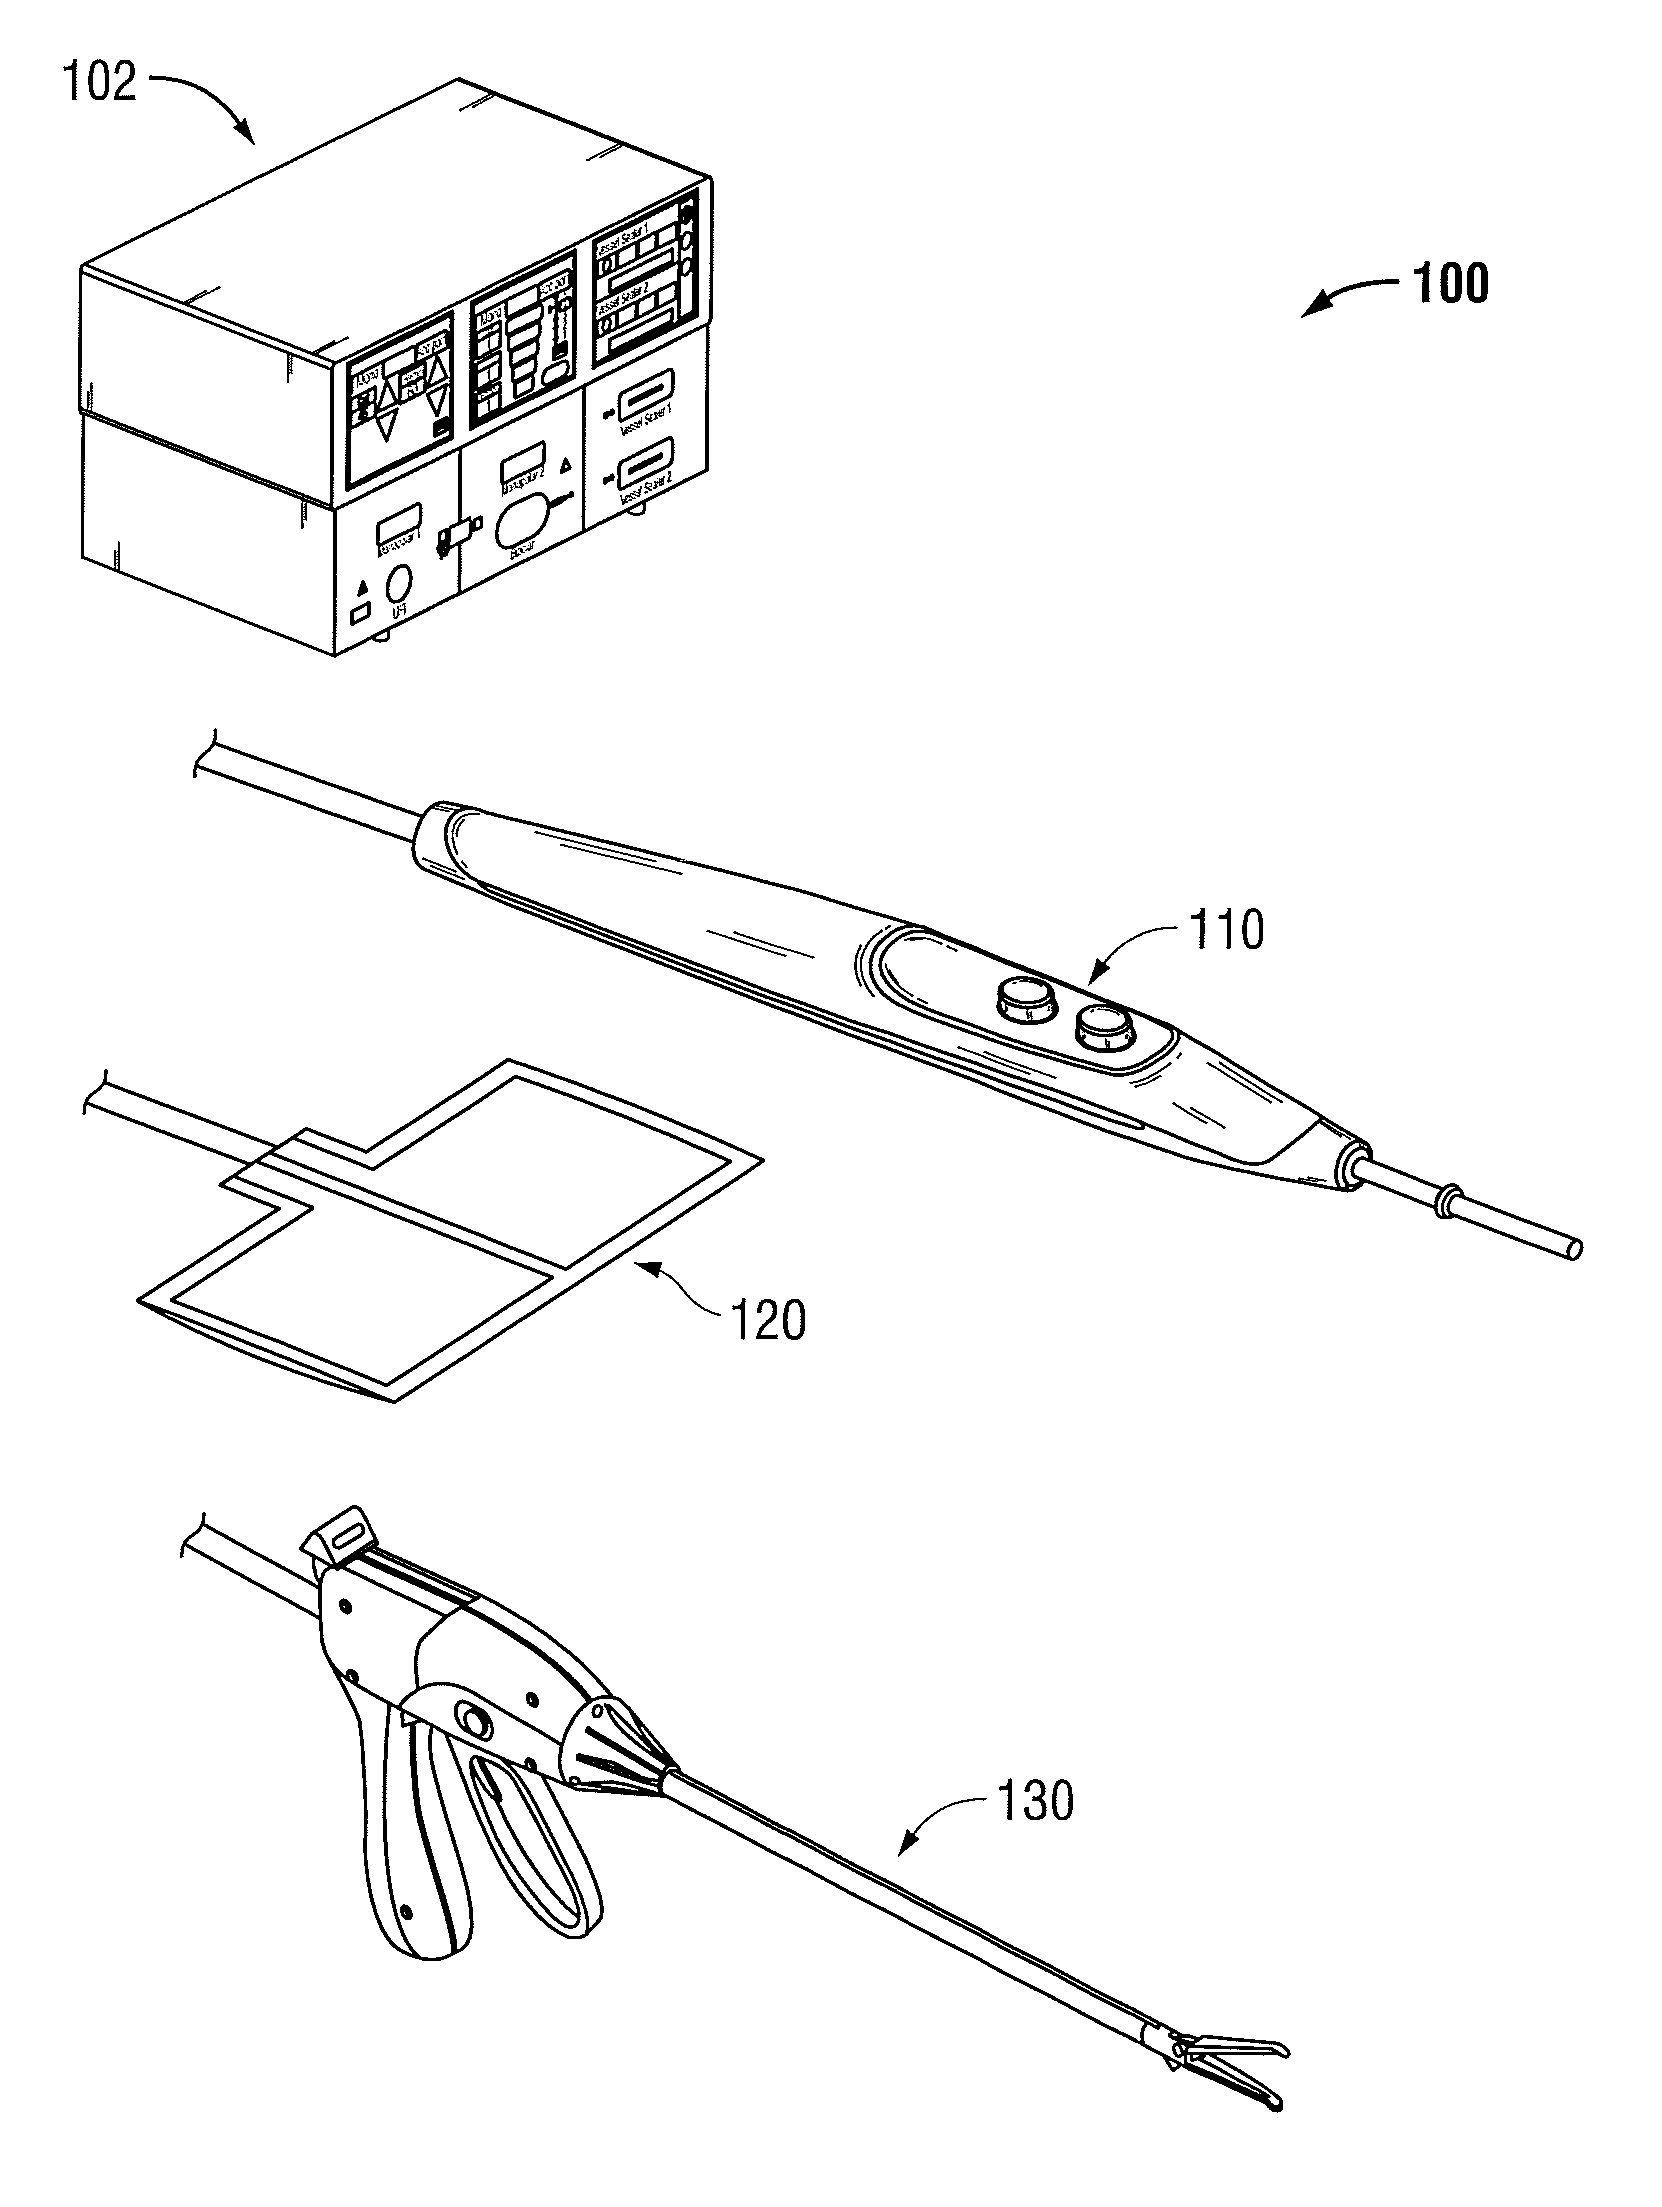 Systems and methods for measuring tissue impedance through an electrosurgical cable